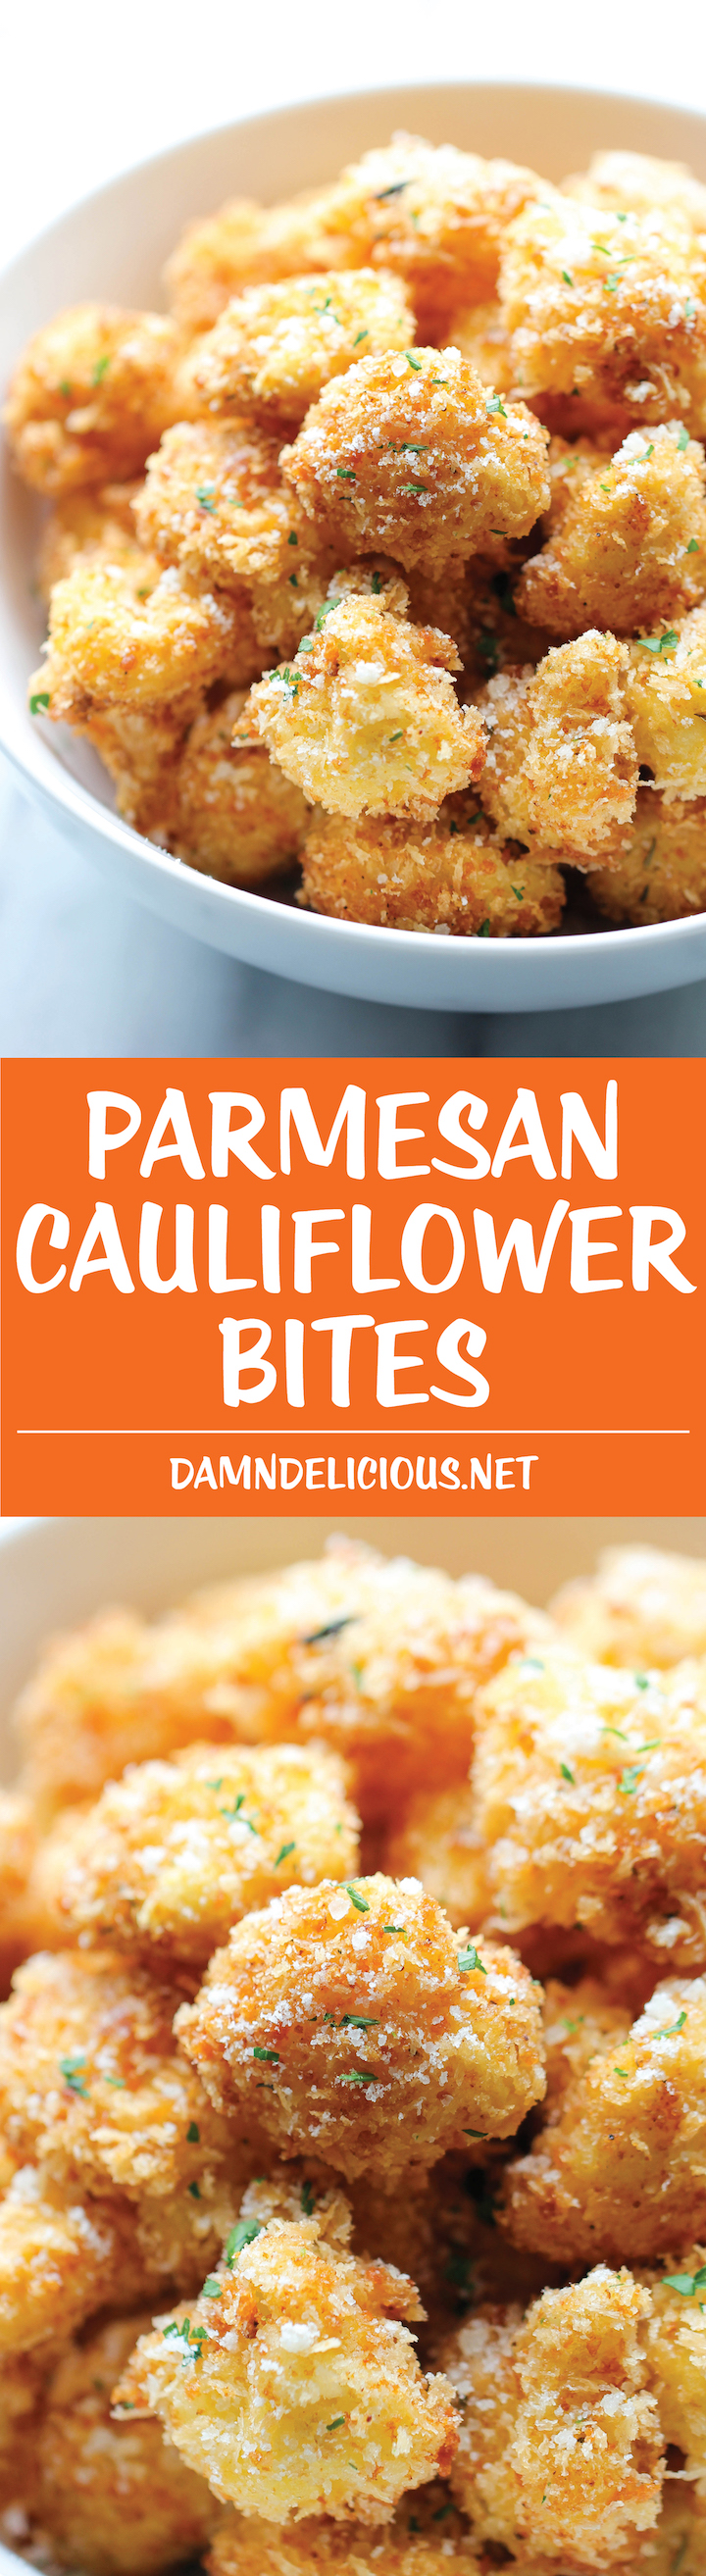 Parmesan Cauliflower Bites - Crisp, crunchy cauliflower bites that even the pickiest of eaters will love. Perfect as an appetizer or snack!